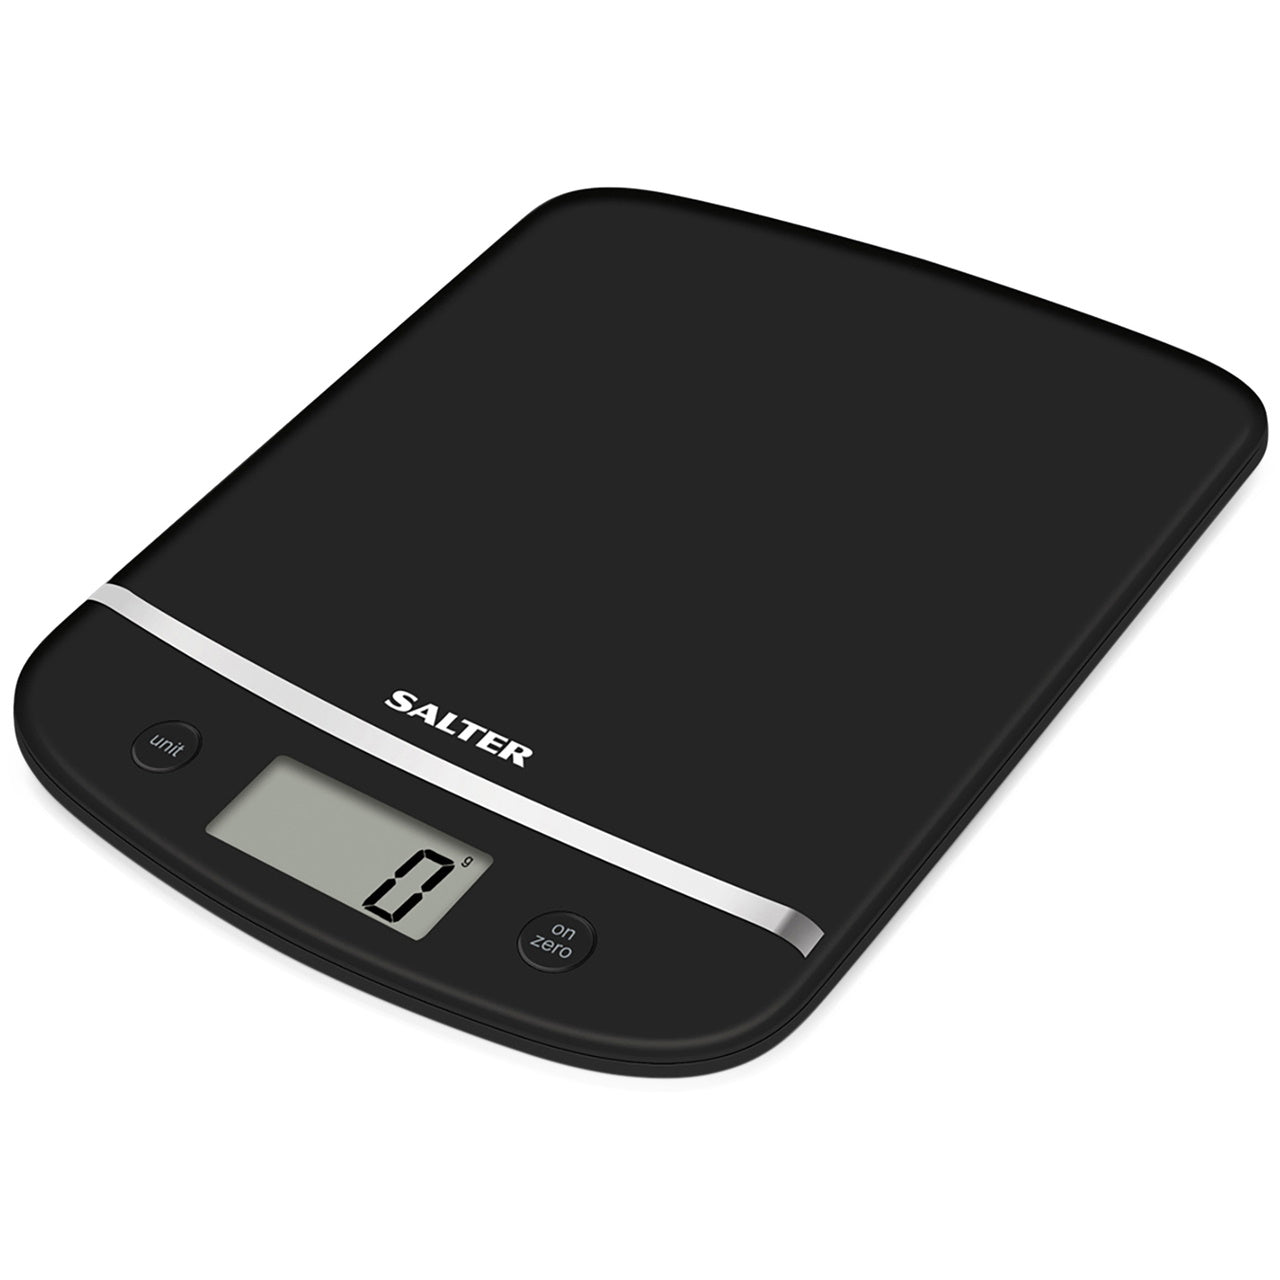 Buy Salter Aquatronic Kitchen Scale With Bowl - White